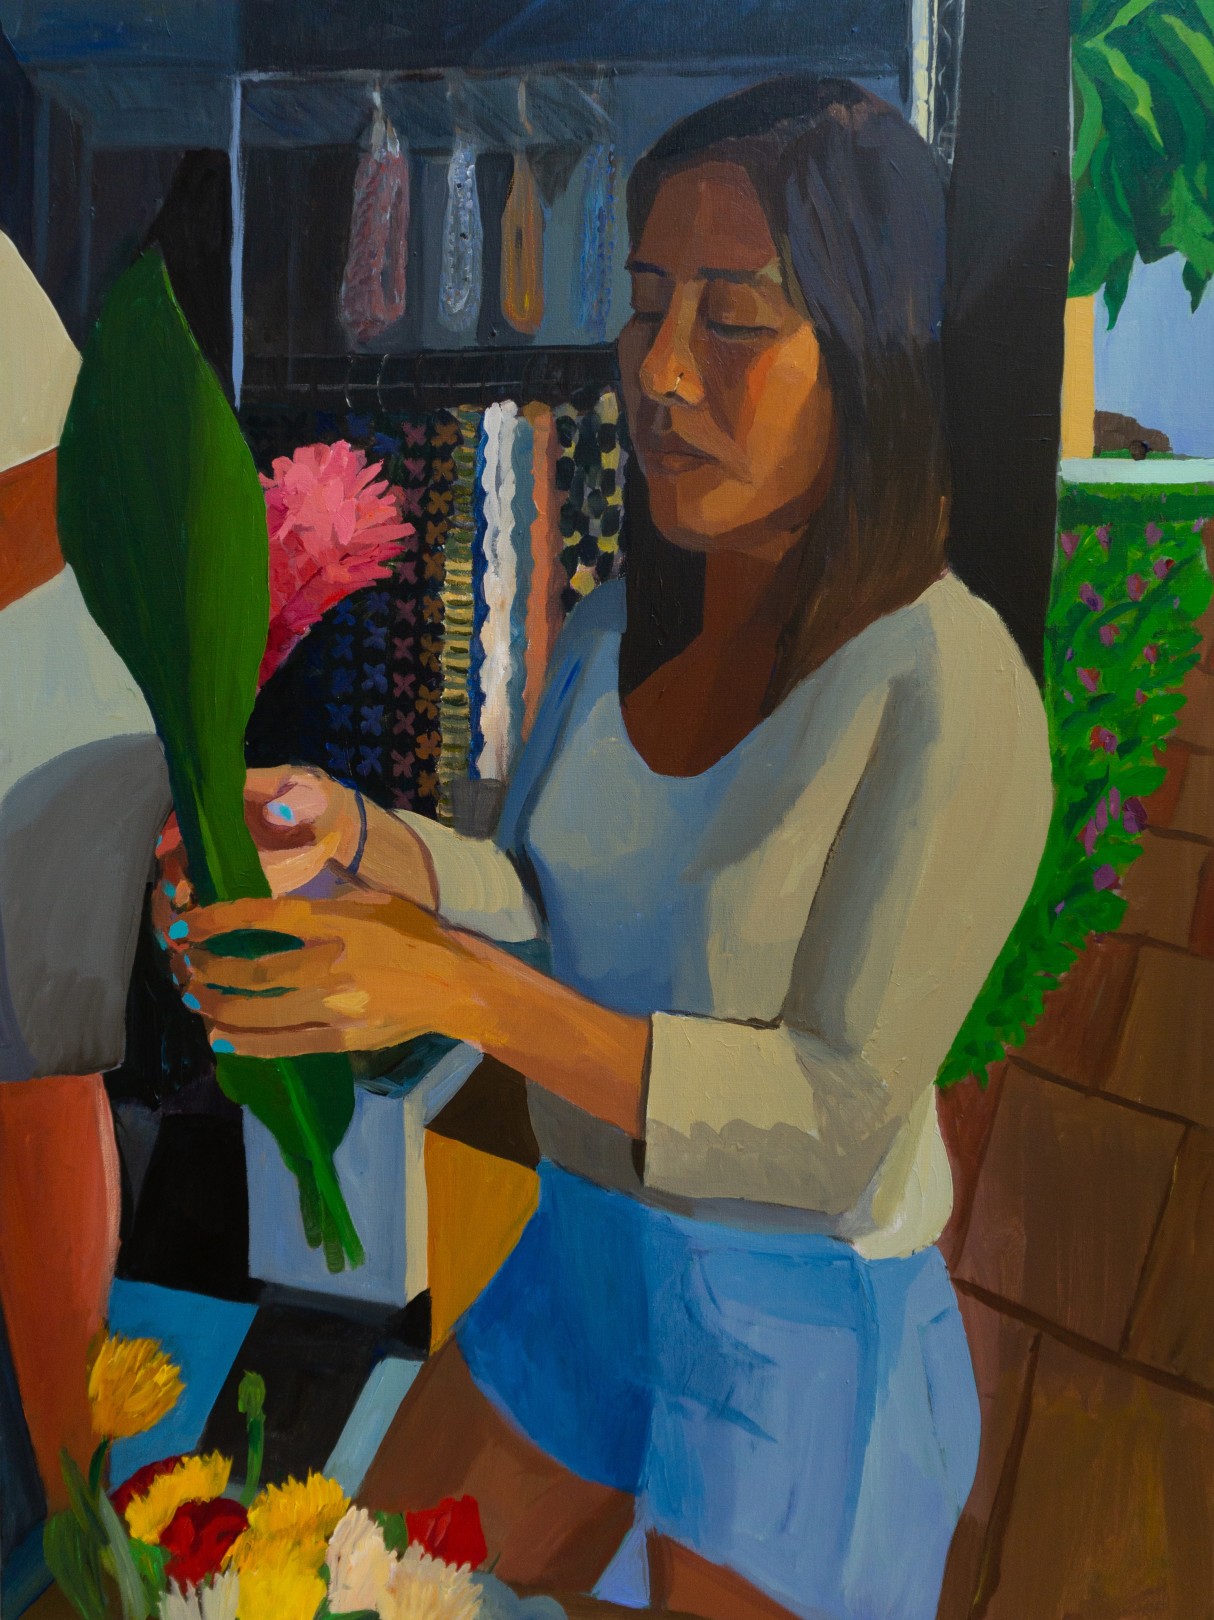 Priscilla buying Mom flowers (Honolulu), 2021 Acrylic and oil pastel on linen 101.5 x 76 cm. / 40 x 30 in.